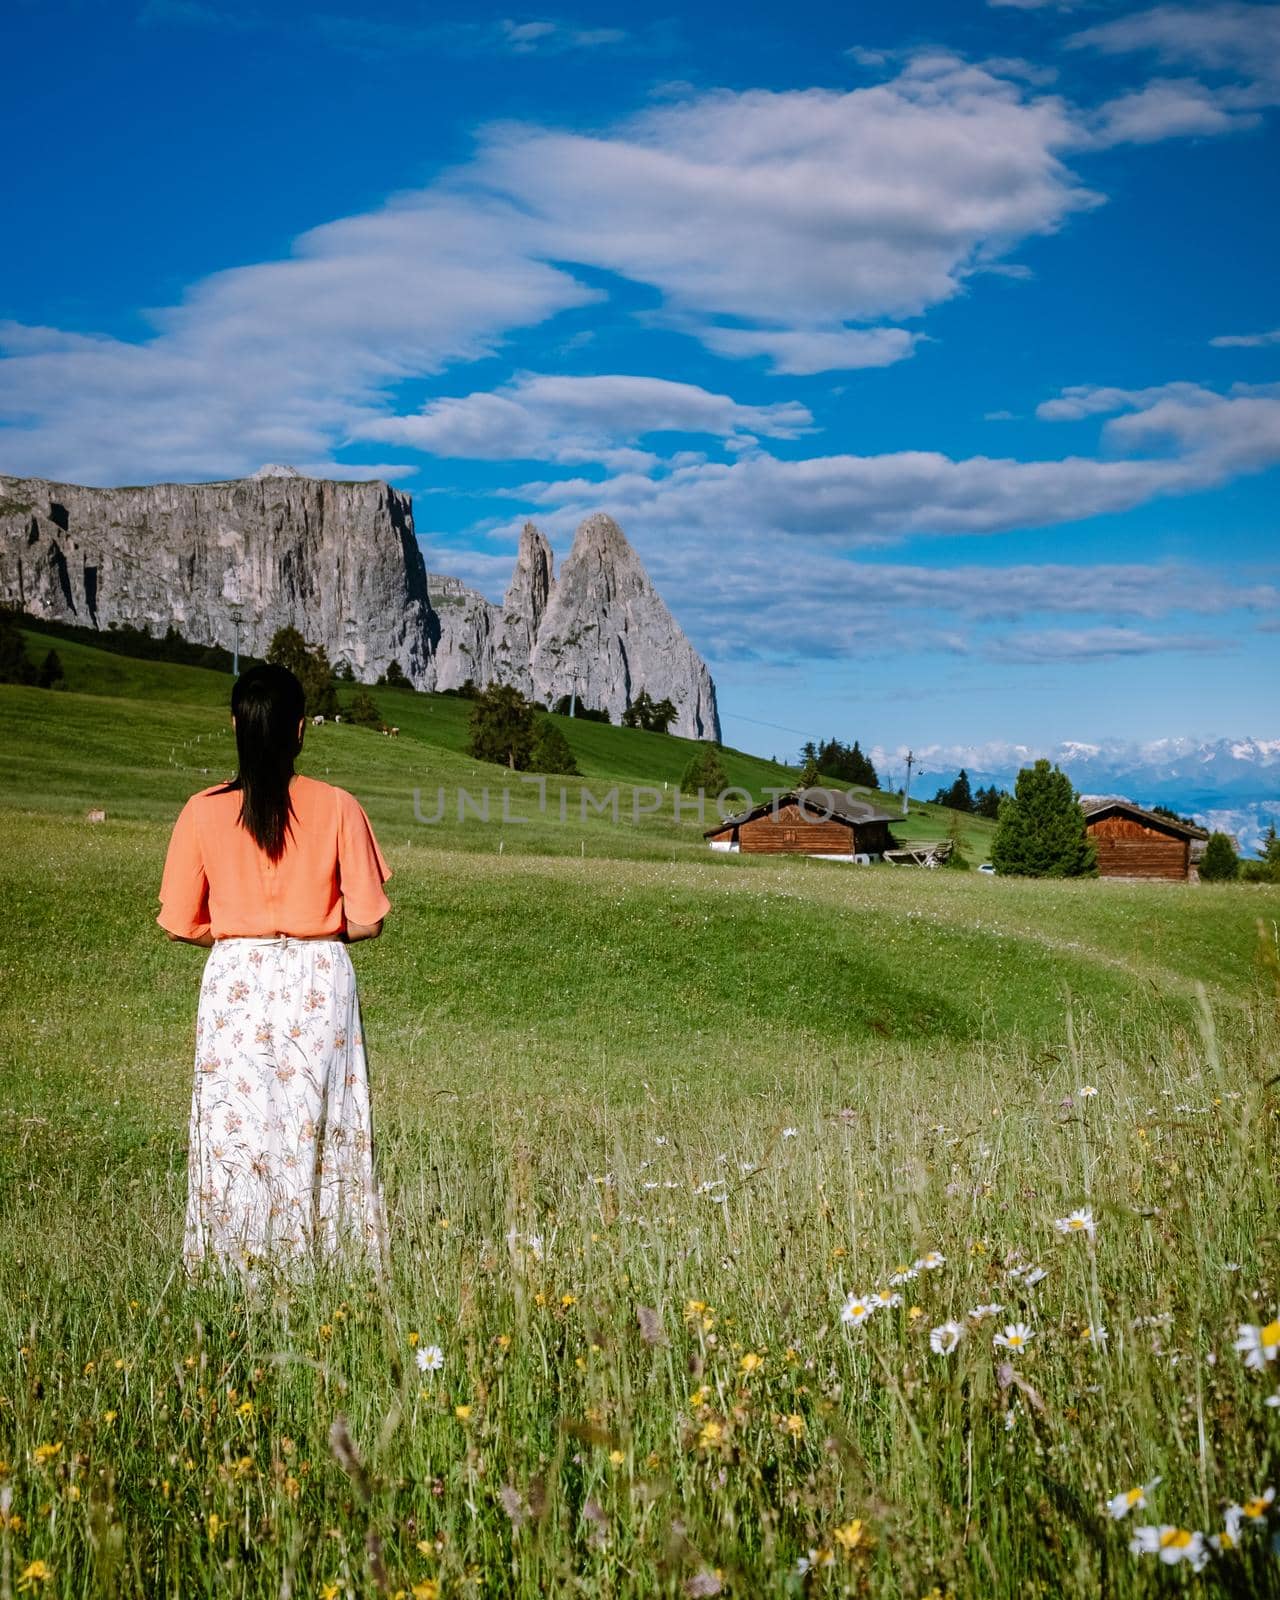  woman on vacation in the Dolomites Italy,Alpe di Siusi - Seiser Alm with Sassolungo - Langkofel mountain group in background at sunset. Yellow spring flowers and wooden chalets in Dolomites, Trentino Alto Adige, South Tyrol, Italy, Europe by fokkebok